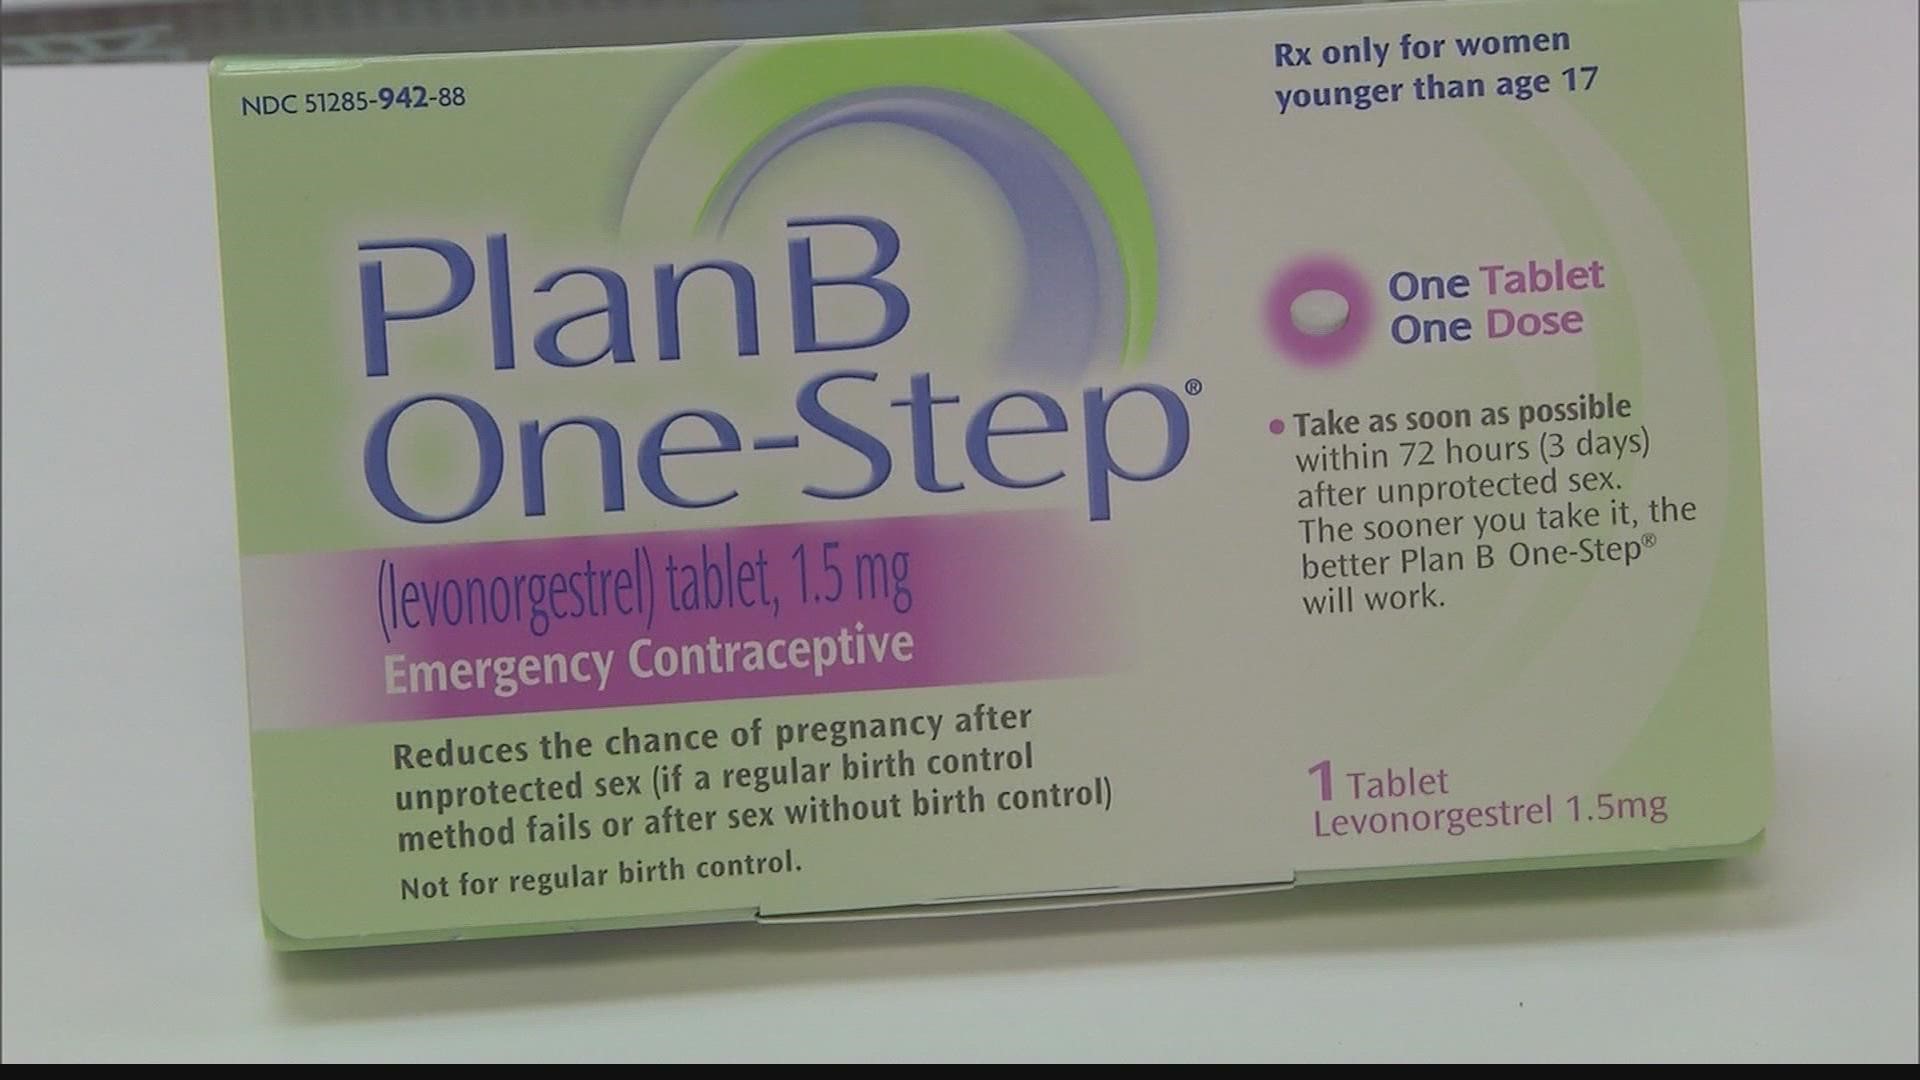 Arizonans are waiting on clarity on the state's abortion laws after the Supreme Court overturned Roe v. Wade. As a result, some women are stocking up on Plan B.